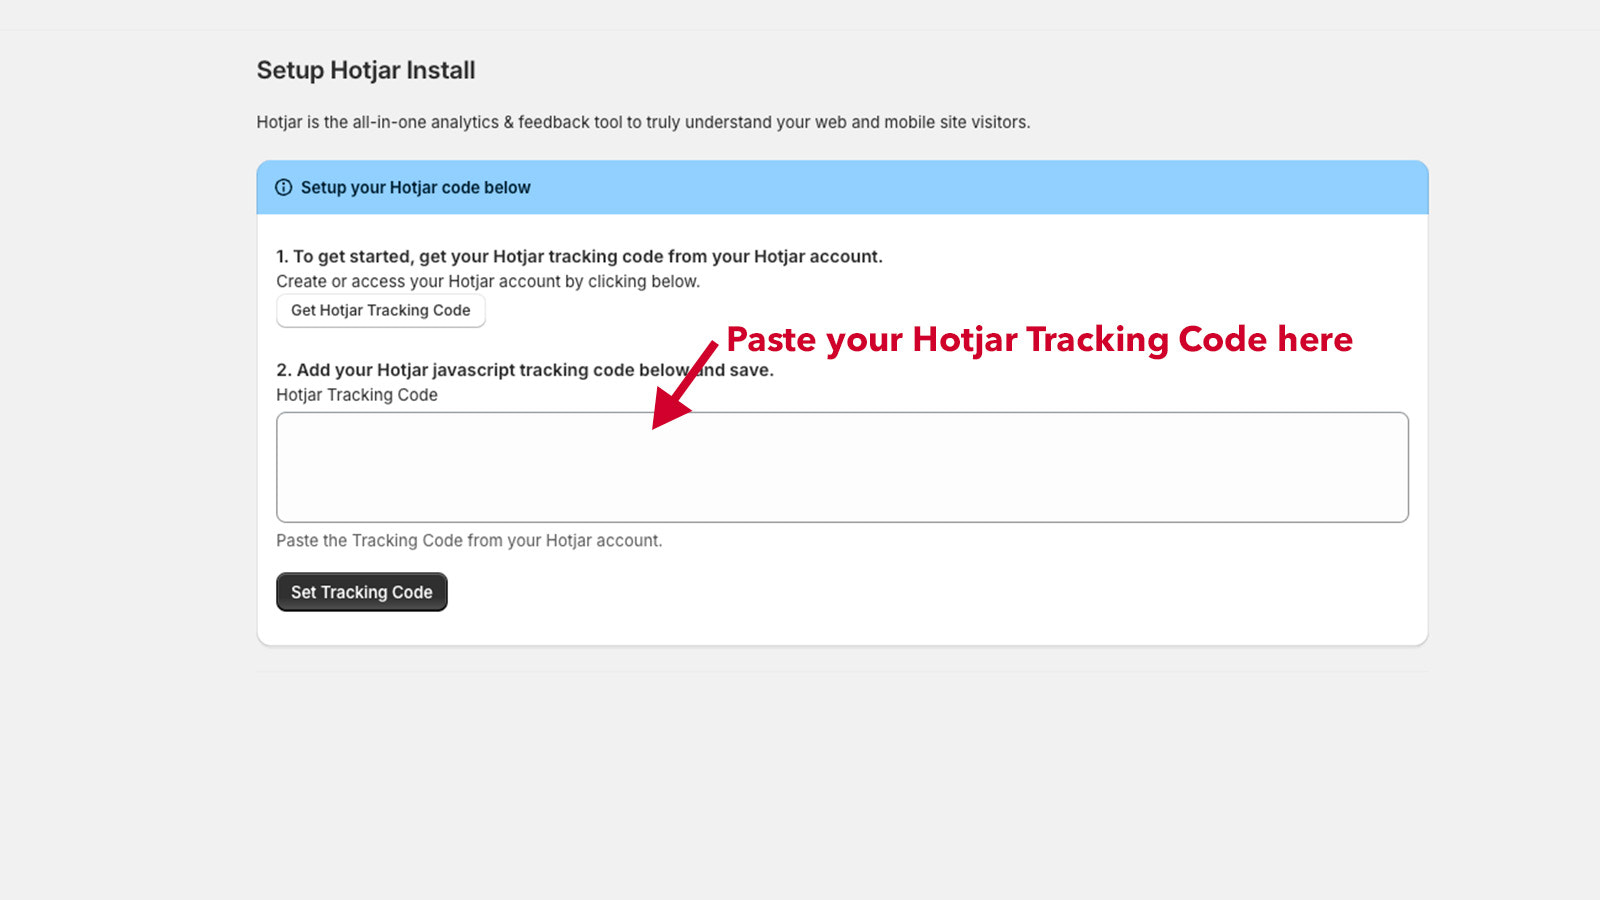 Paste your tracking code from Hotjar.com